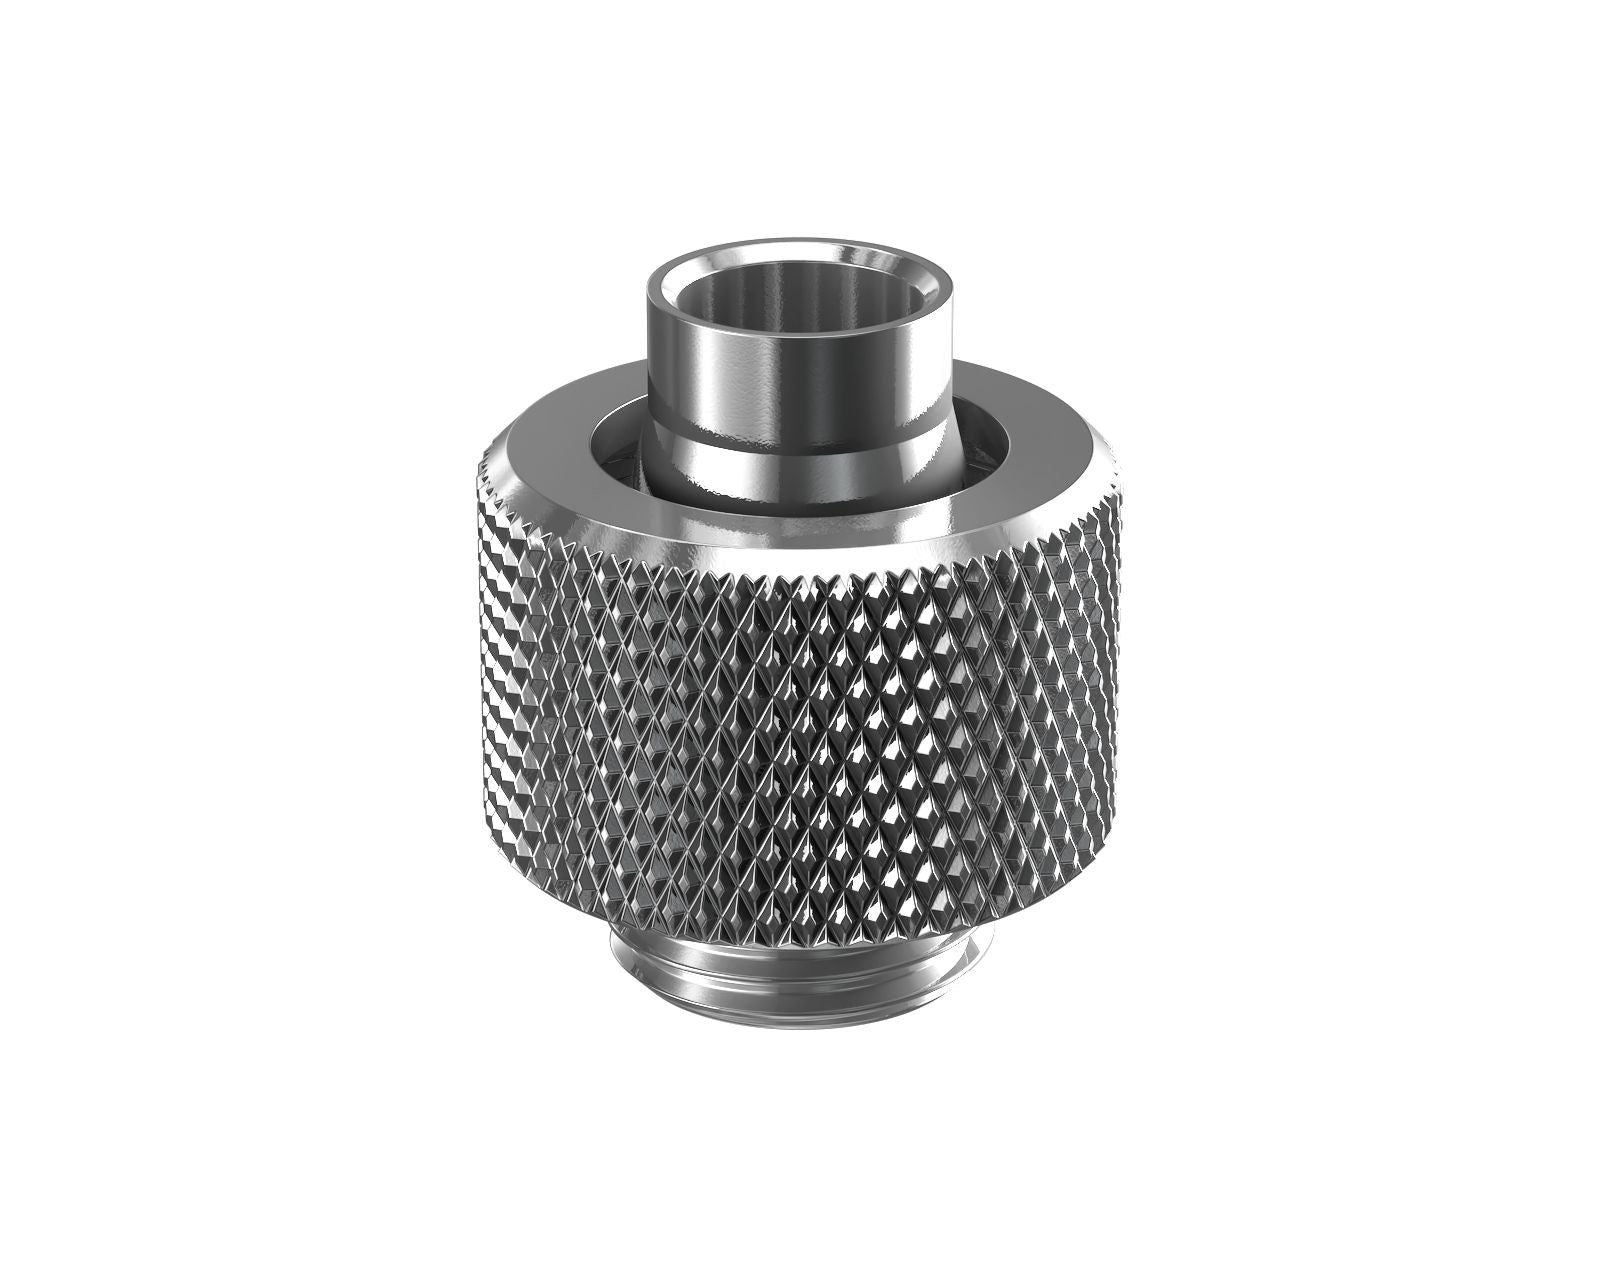 PrimoChill SecureFit SX - Premium Compression Fitting For 3/8in ID x 1/2in OD Flexible Tubing (F-SFSX12) - Available in 20+ Colors, Custom Watercooling Loop Ready - Silver Nickel